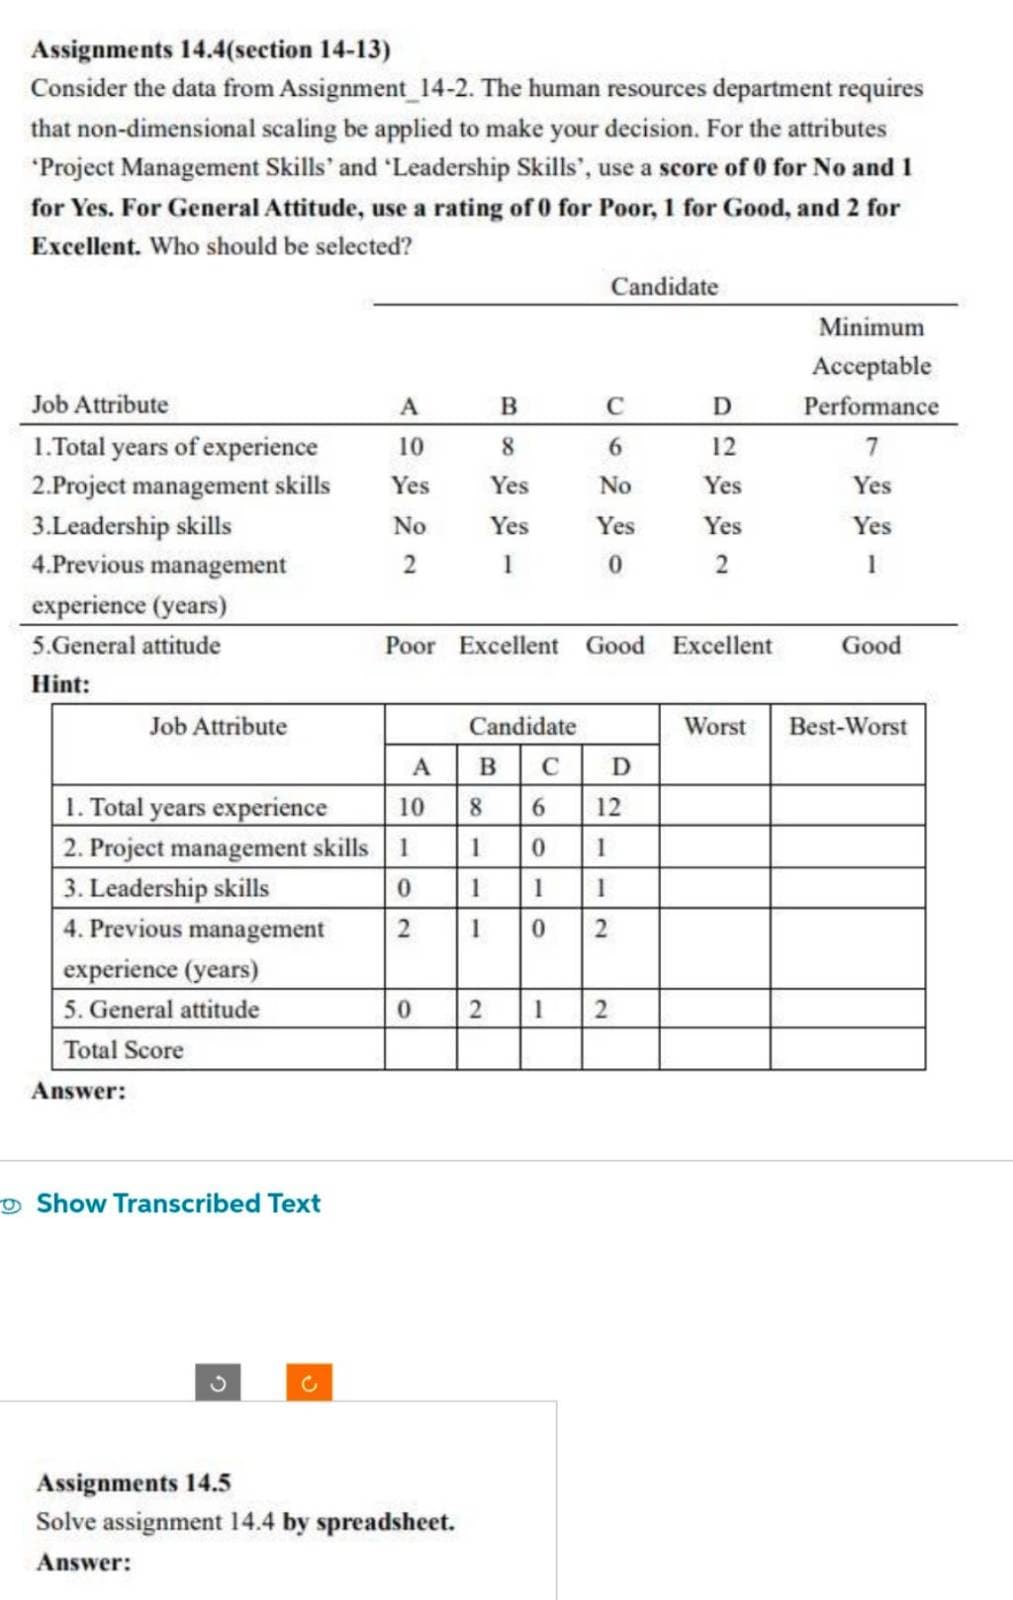 Assignments 14.4(section 14-13)
Consider the data from Assignment_14-2. The human resources department requires
that non-dimensional scaling be applied to make your decision. For the attributes
*Project Management Skills' and 'Leadership Skills', use a score of 0 for No and 1
for Yes. For General Attitude, use a rating of 0 for Poor, 1 for Good, and 2 for
Excellent. Who should be selected?
Job Attribute
1.Total years of experience
2.Project management skills
3.Leadership skills
4.Previous management
experience (years)
5.General attitude
Hint:
Job Attribute
experience (years)
5. General attitude
Total Score
Answer:
A
10
Yes
No
2
1. Total years experience
10
2. Project management skills 1
3. Leadership skills
0
4. Previous management
2
Show Transcribed Text
A
0
B
8
Yes
Yes
1
Poor Excellent Good Excellent
Assignments 14.5
Solve assignment 14.4 by spreadsheet.
Answer:
Candidate
C
6
No
Yes
0
B
Candidate
C
8
6 12
1
0
1
1
1
I
1 0
2
D
2 1 2
D
12
Yes
Yes
2
Worst
Minimum
Acceptable
Performance
7
Yes
Yes
1
Good
Best-Worst